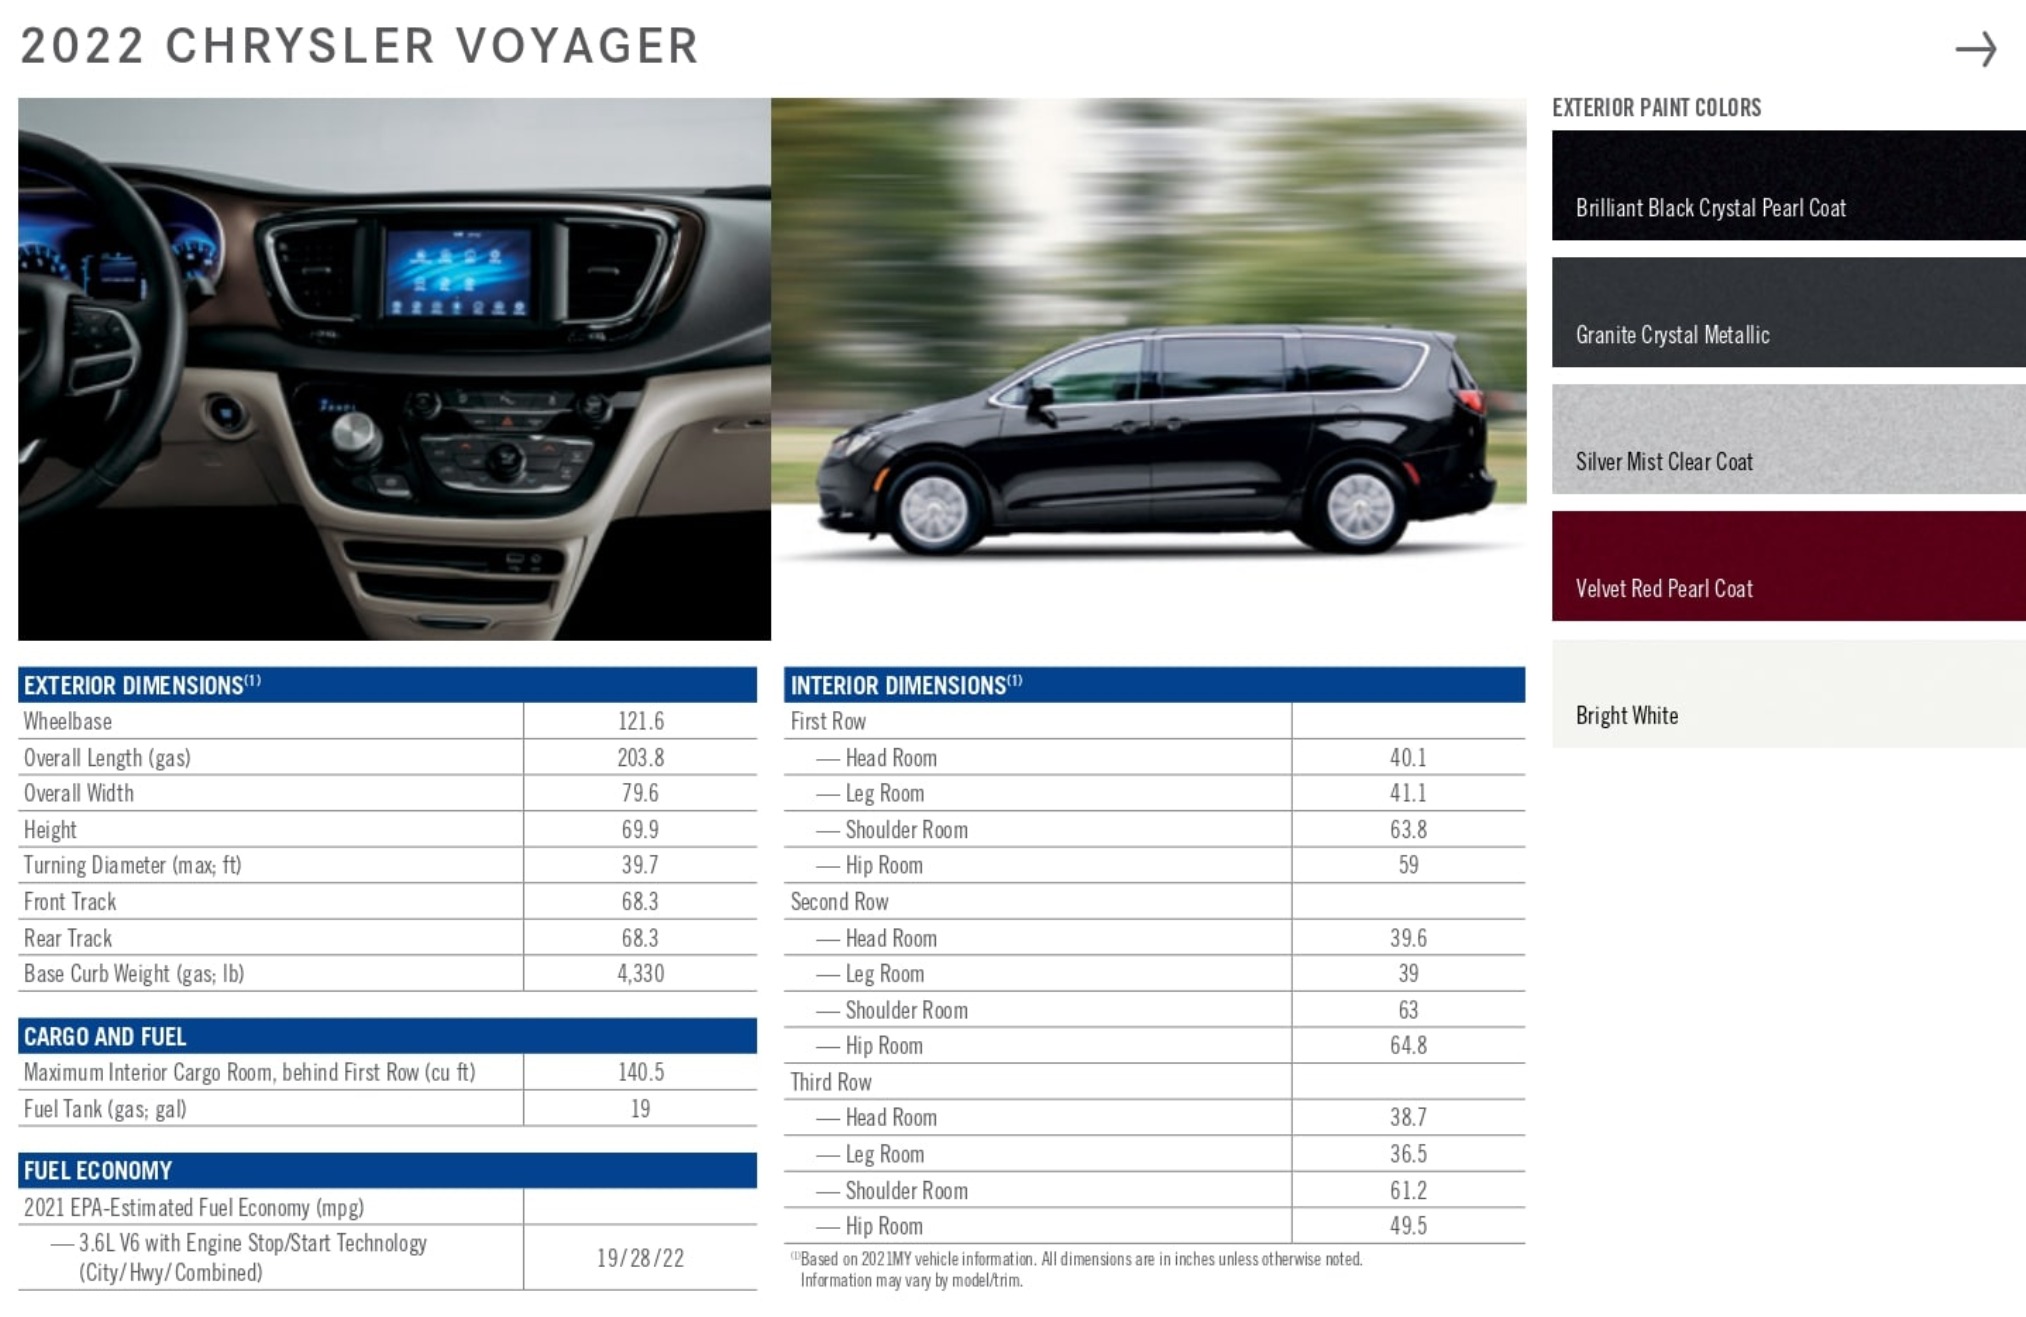 For the 2022 year color shades and examples of the exterior color of the Chrysler model.